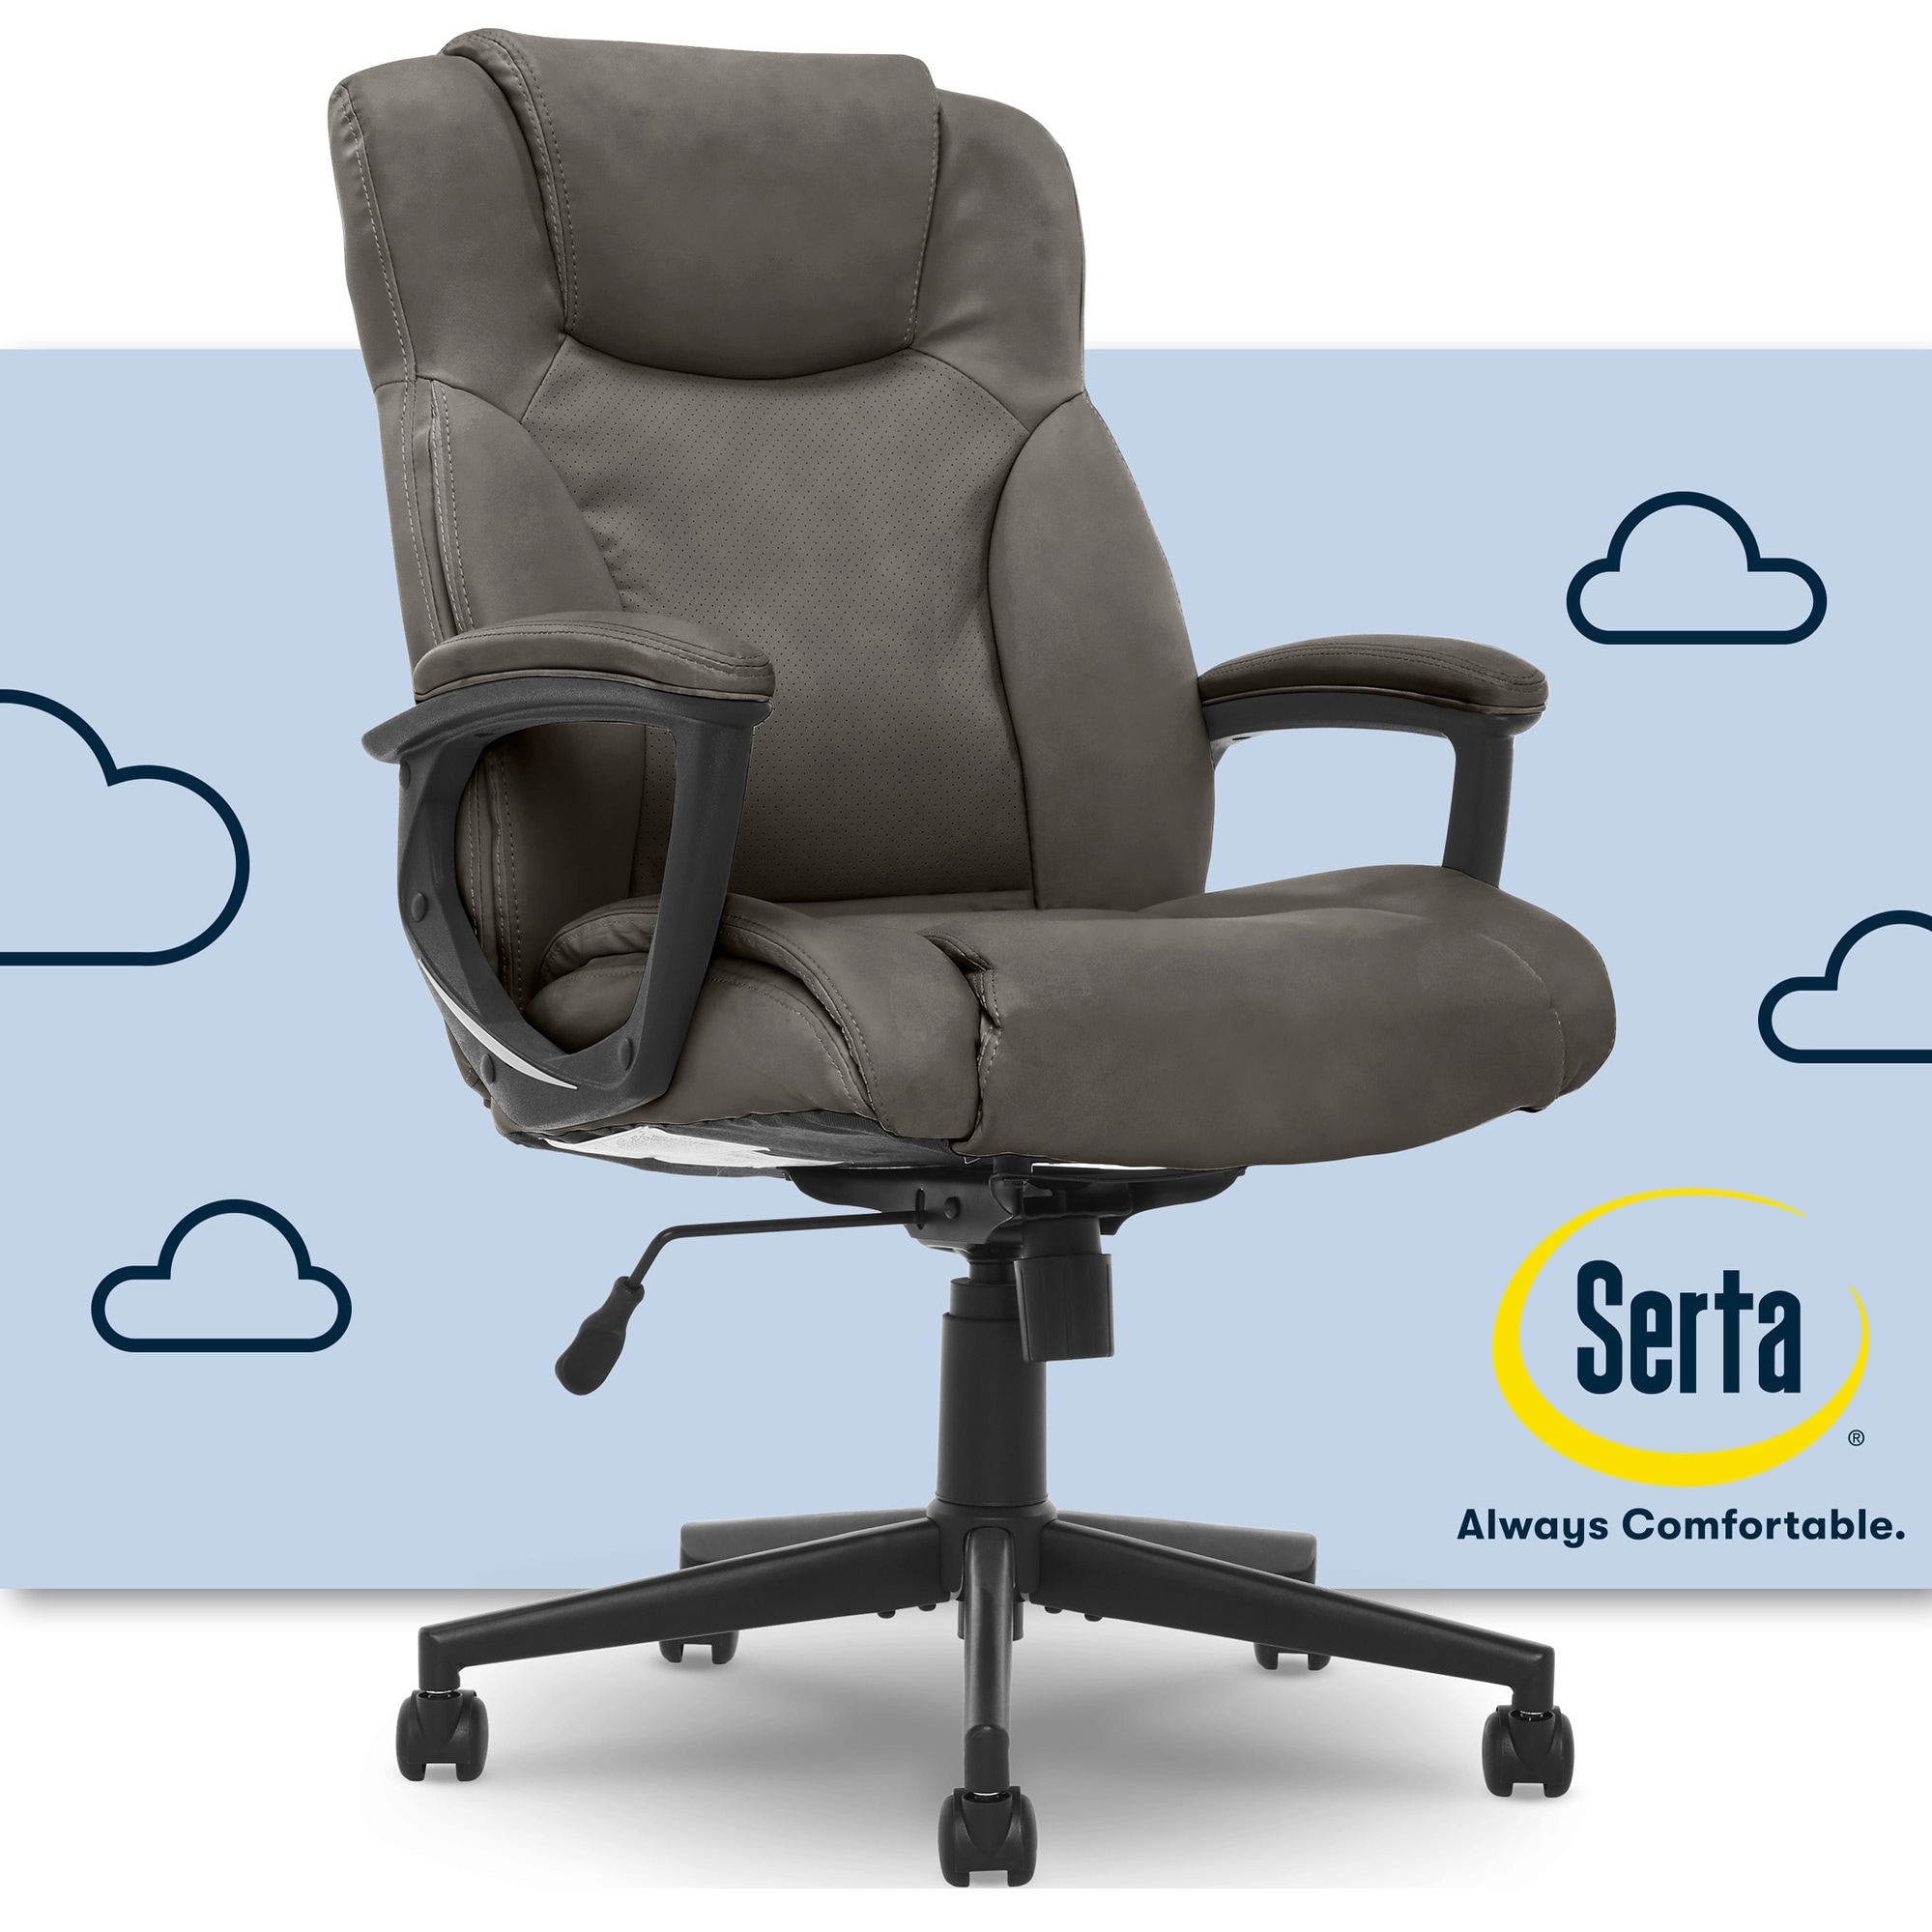 https://ak1.ostkcdn.com/images/products/is/images/direct/50780236d089123d2c071cdb8af721e8b3b7984f/Serta-Connor-Executive-Office-Chair---Ergonomic-Computer-Chair-with-Layered-Body-Pillows-and-Contoured-Lumbar.jpg